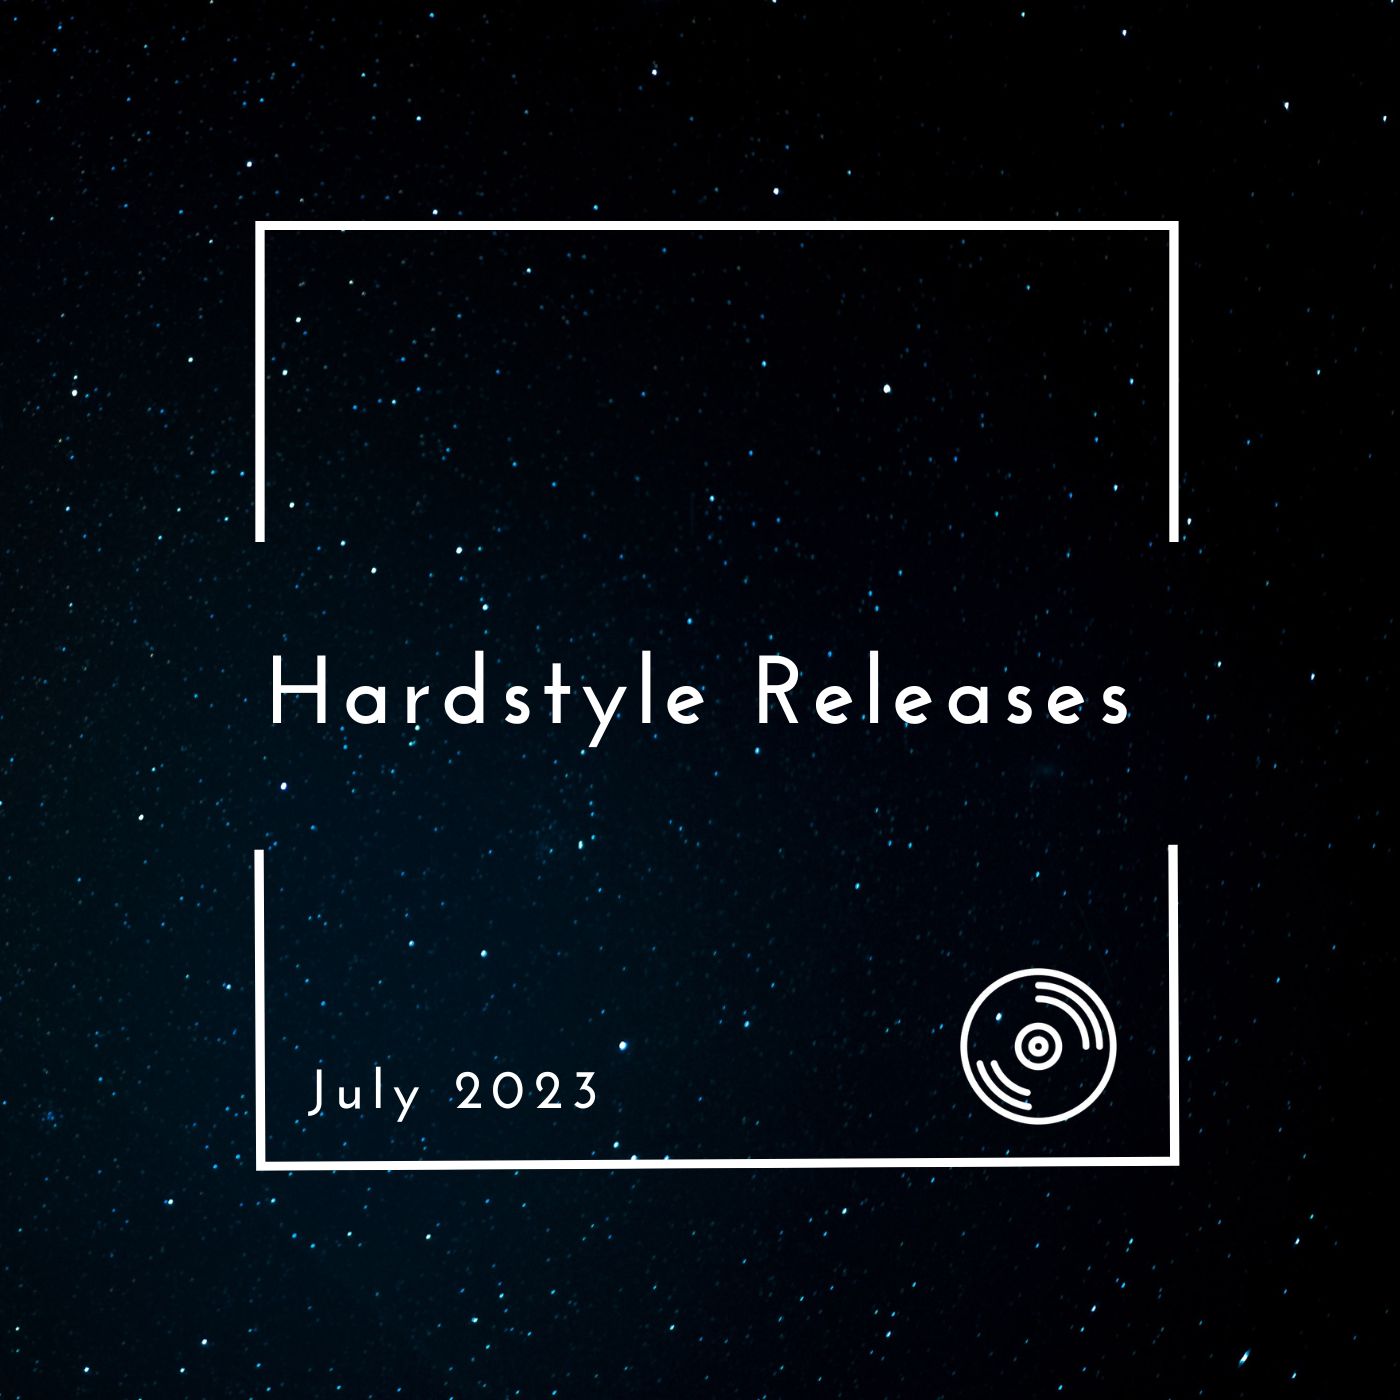 Hardstyle Releases July 2023